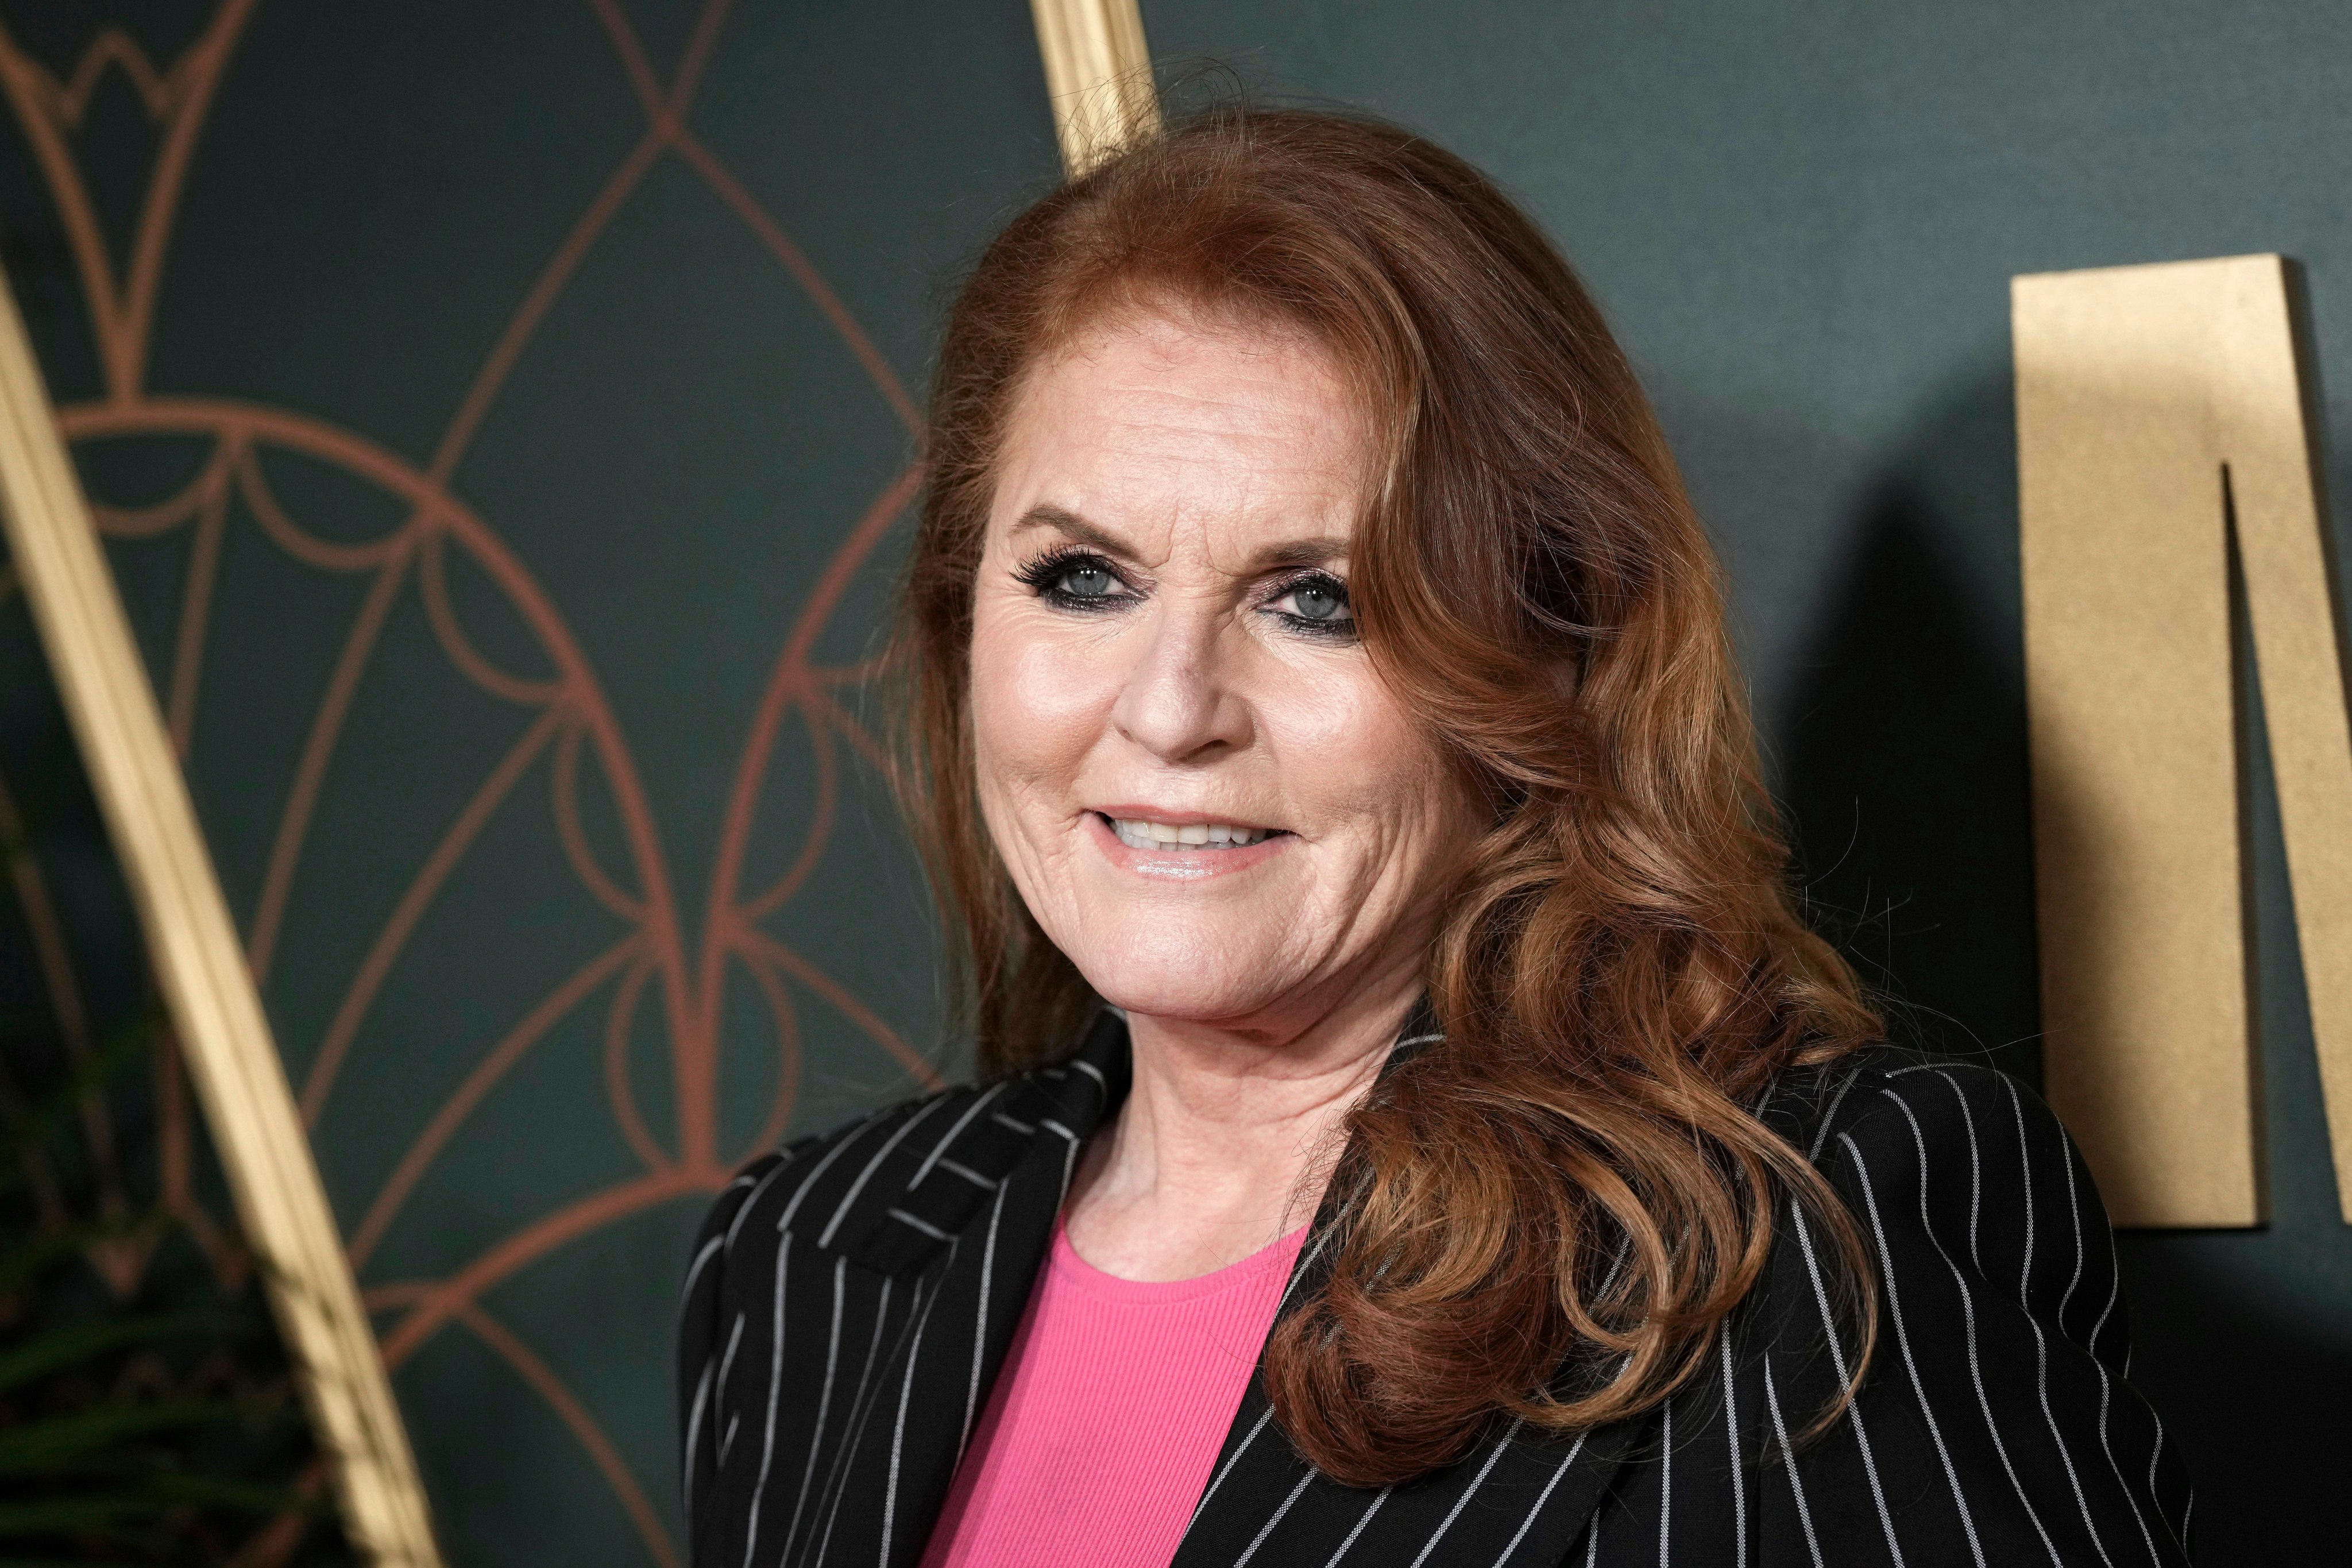 Sarah Ferguson in London in March. The Duchess of York has been diagnosed with a malignant skin cancer that was discovered during her treatment for breast cancer. Photo: Invision / AP